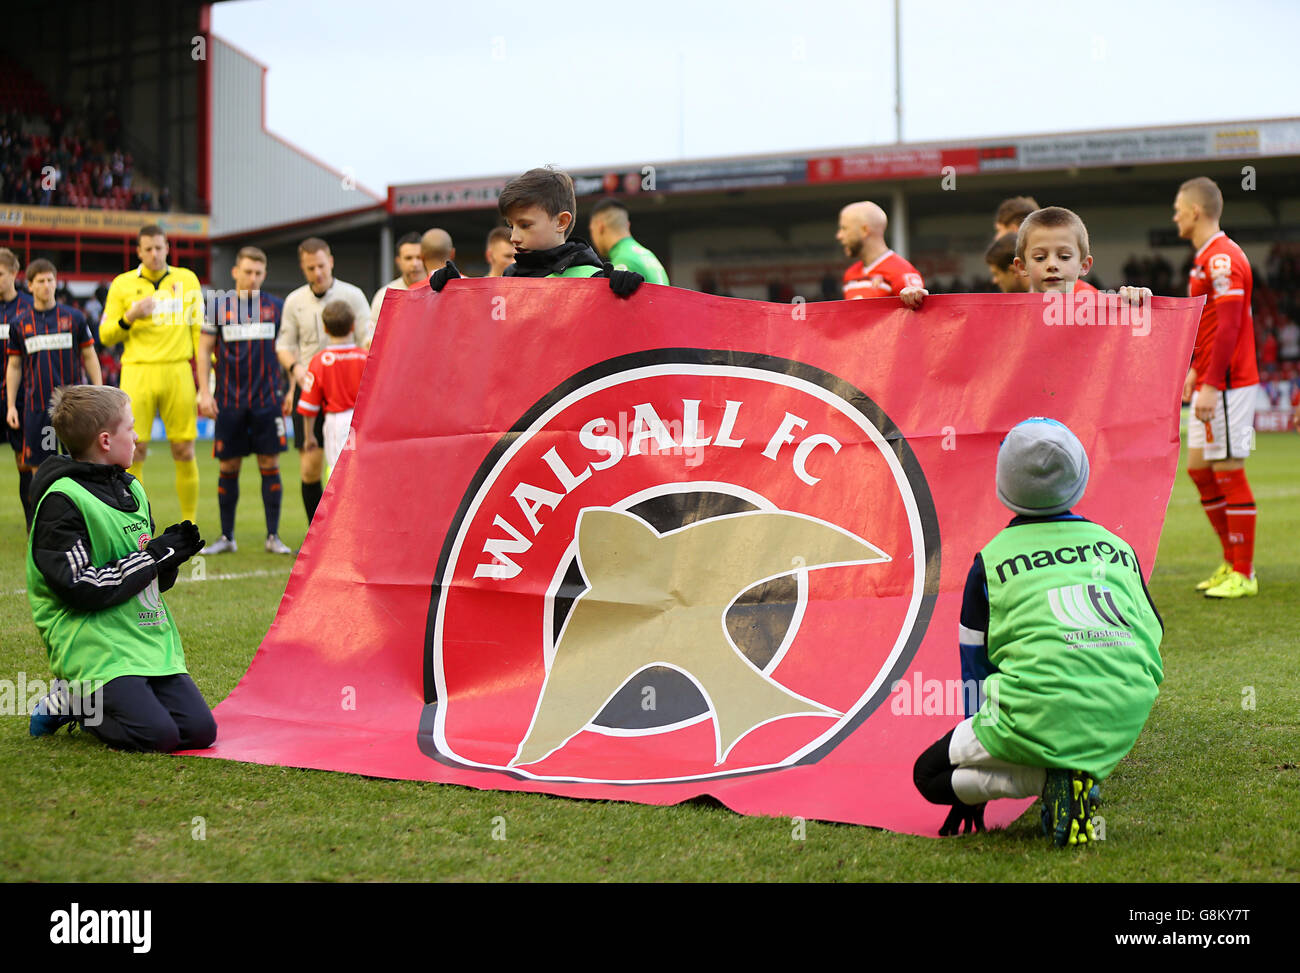 Walsall v Blackpool - Sky Bet League One - Banks's Stadium. Mascots hold a Walsall FC banner. Stock Photo